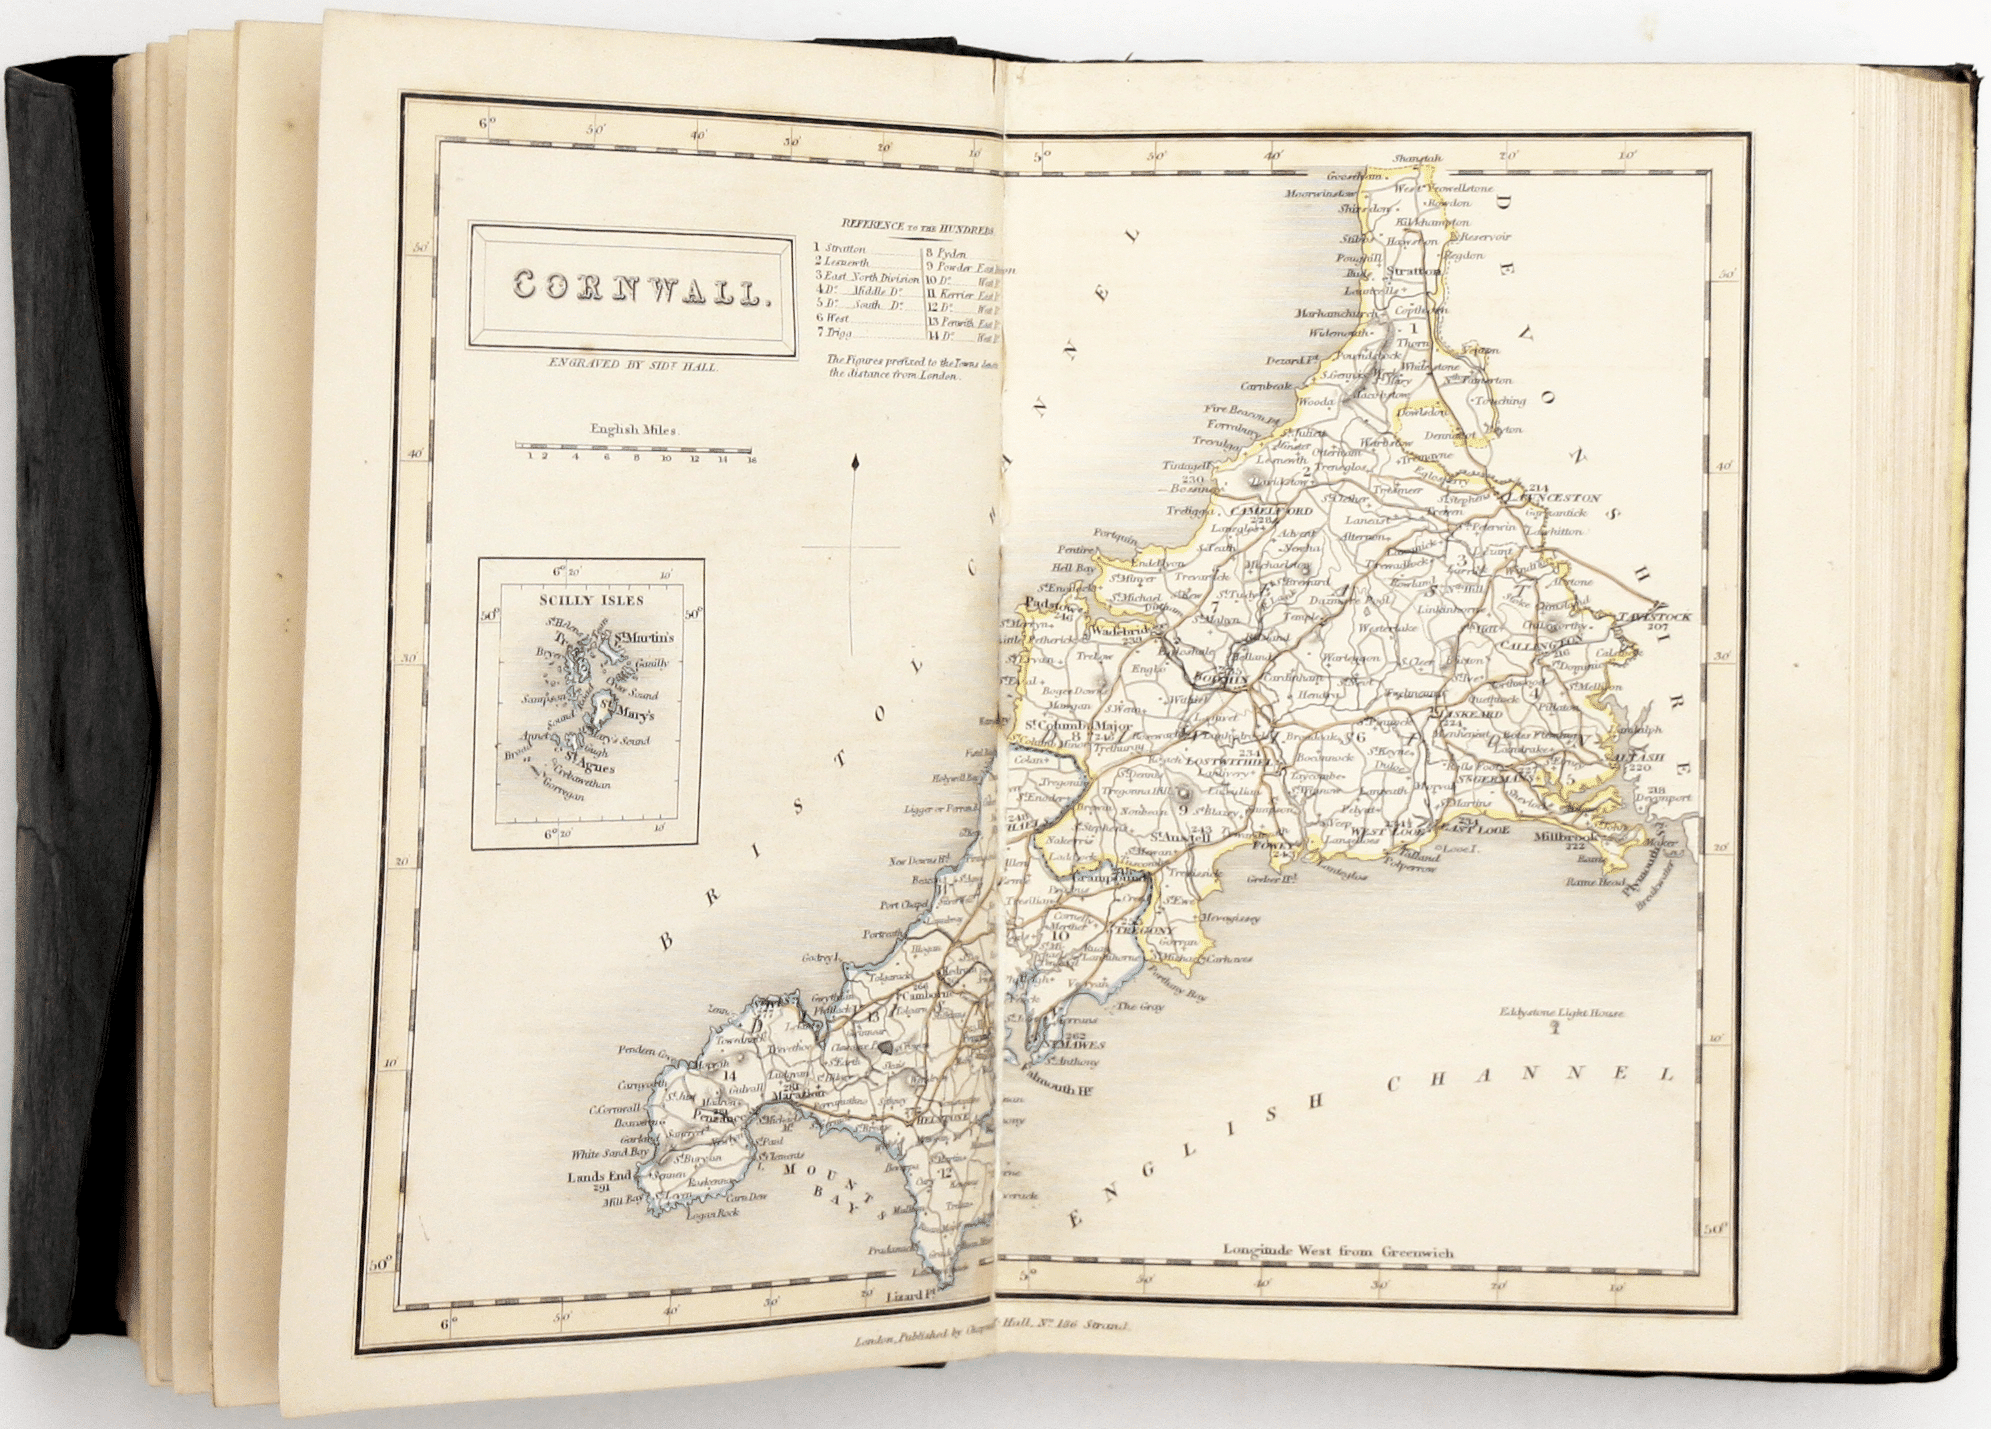 Hall’s Travelling County Atlas – First Edition